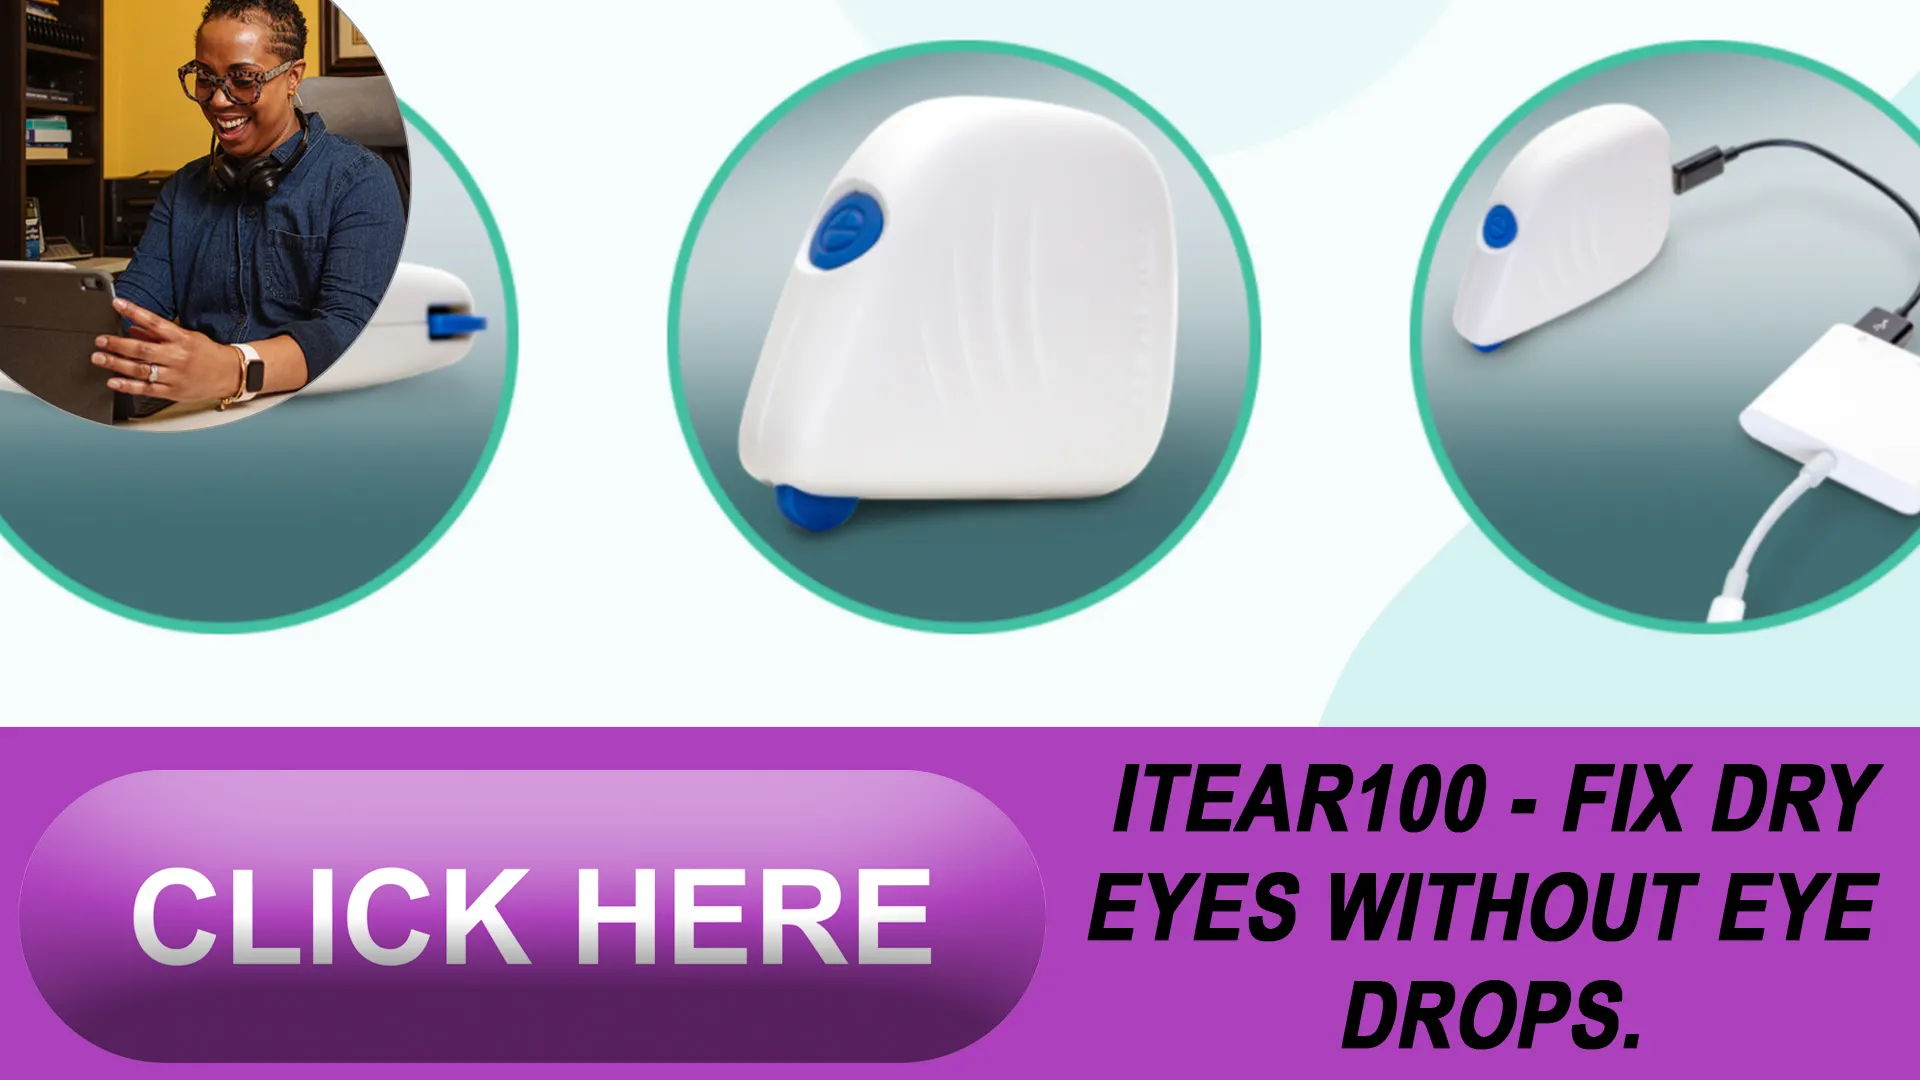 Introducing the iTEAR100 Solution